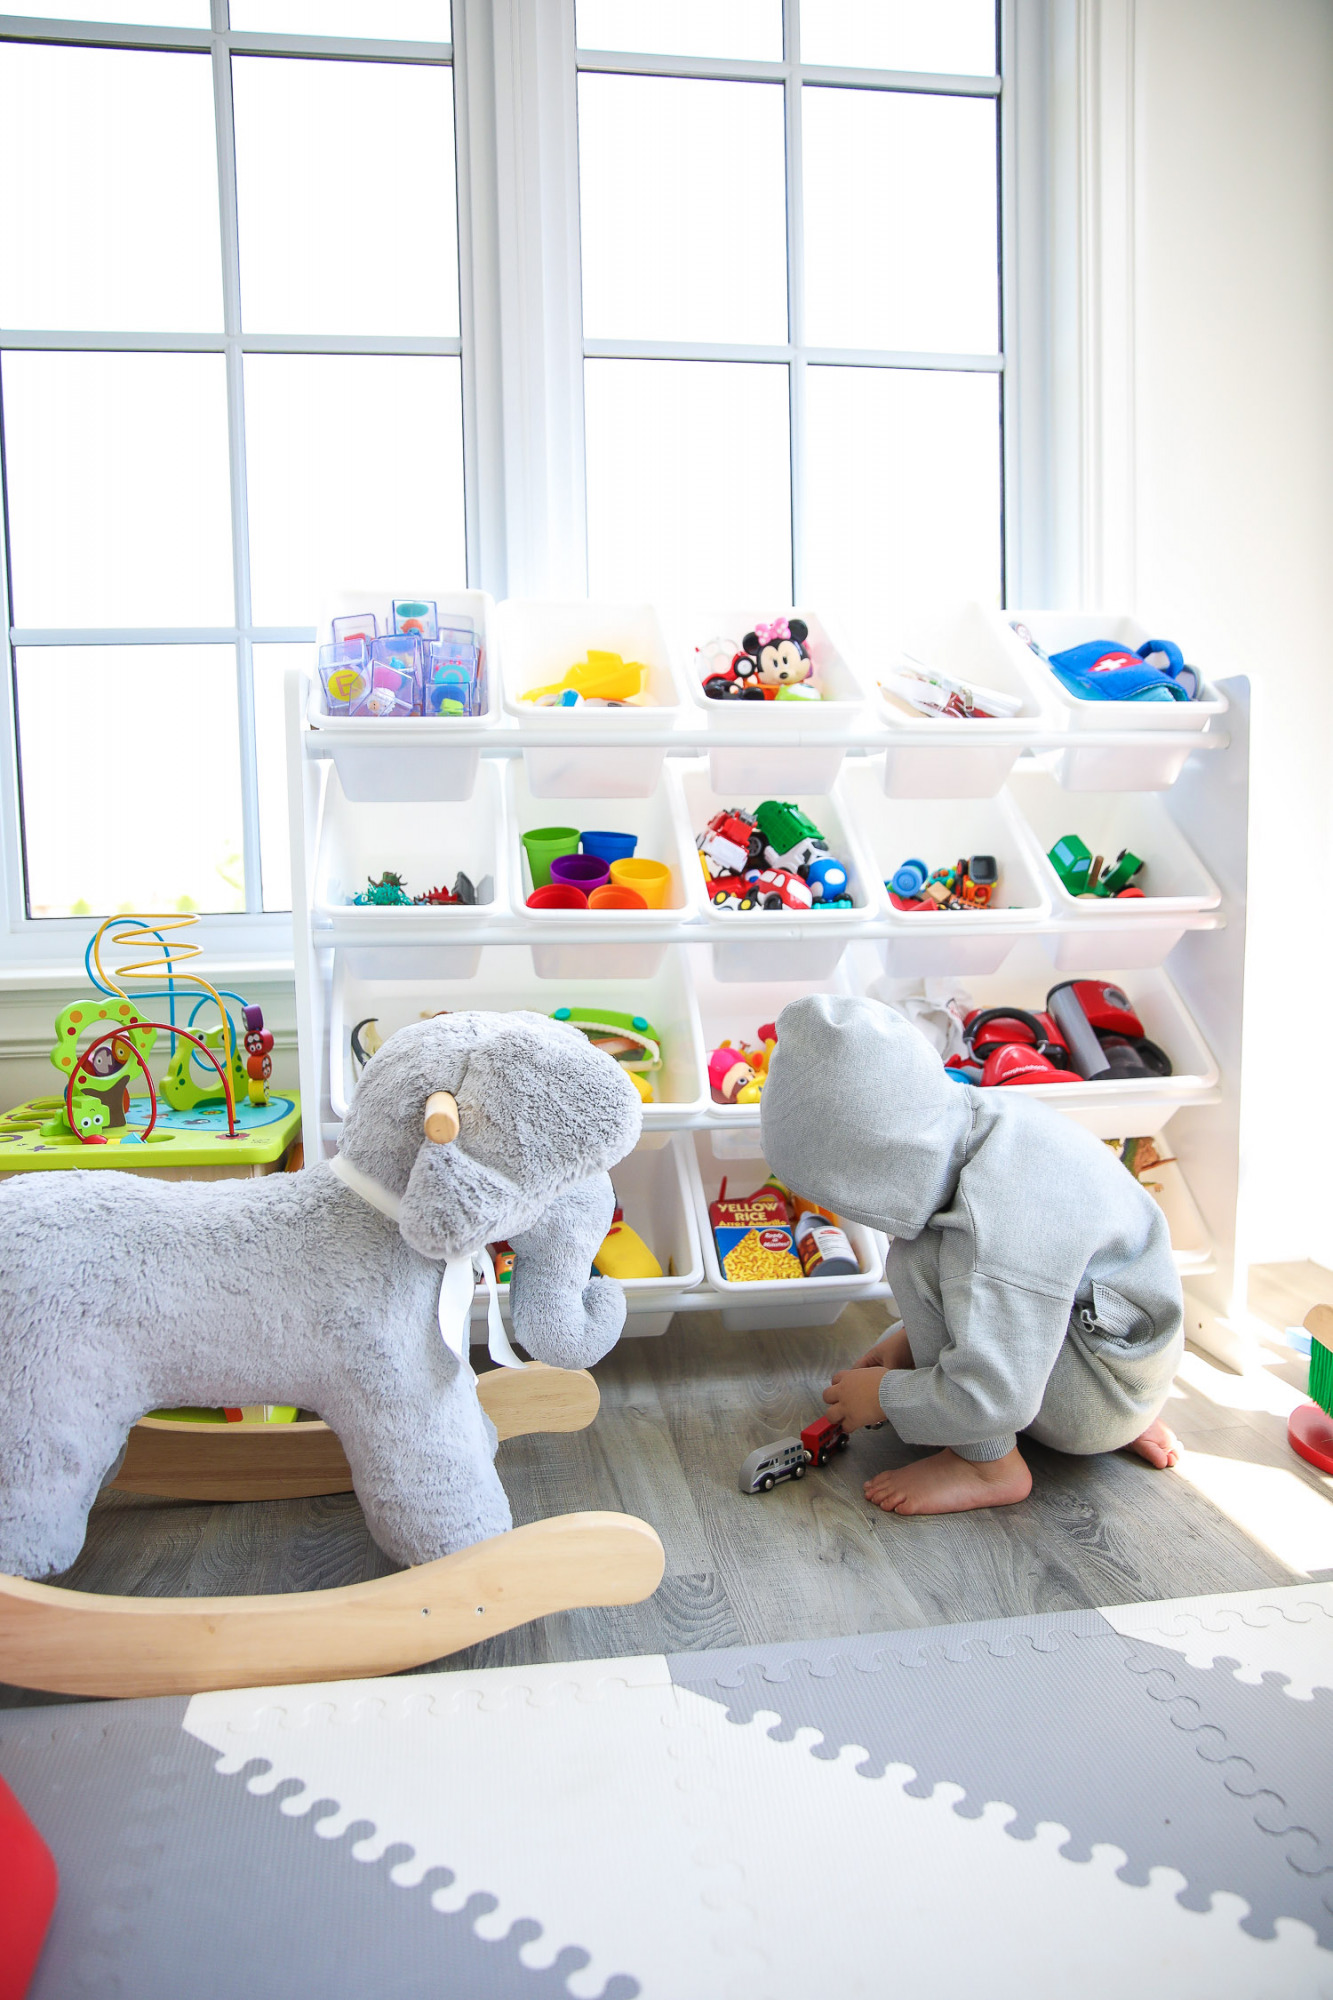 walmart kids home organization must haves, playroom organization ideas, emily gemma, the sweetest thing blog | Playroom Organization by popular US life and style blog, The Sweetest Thing: image of a playroom set up with a Walmart Humble Crew Super-Sized Toy Organizer with 16 Plastic Bins, foam flooring, basketball hoop, and rocking elephant. 